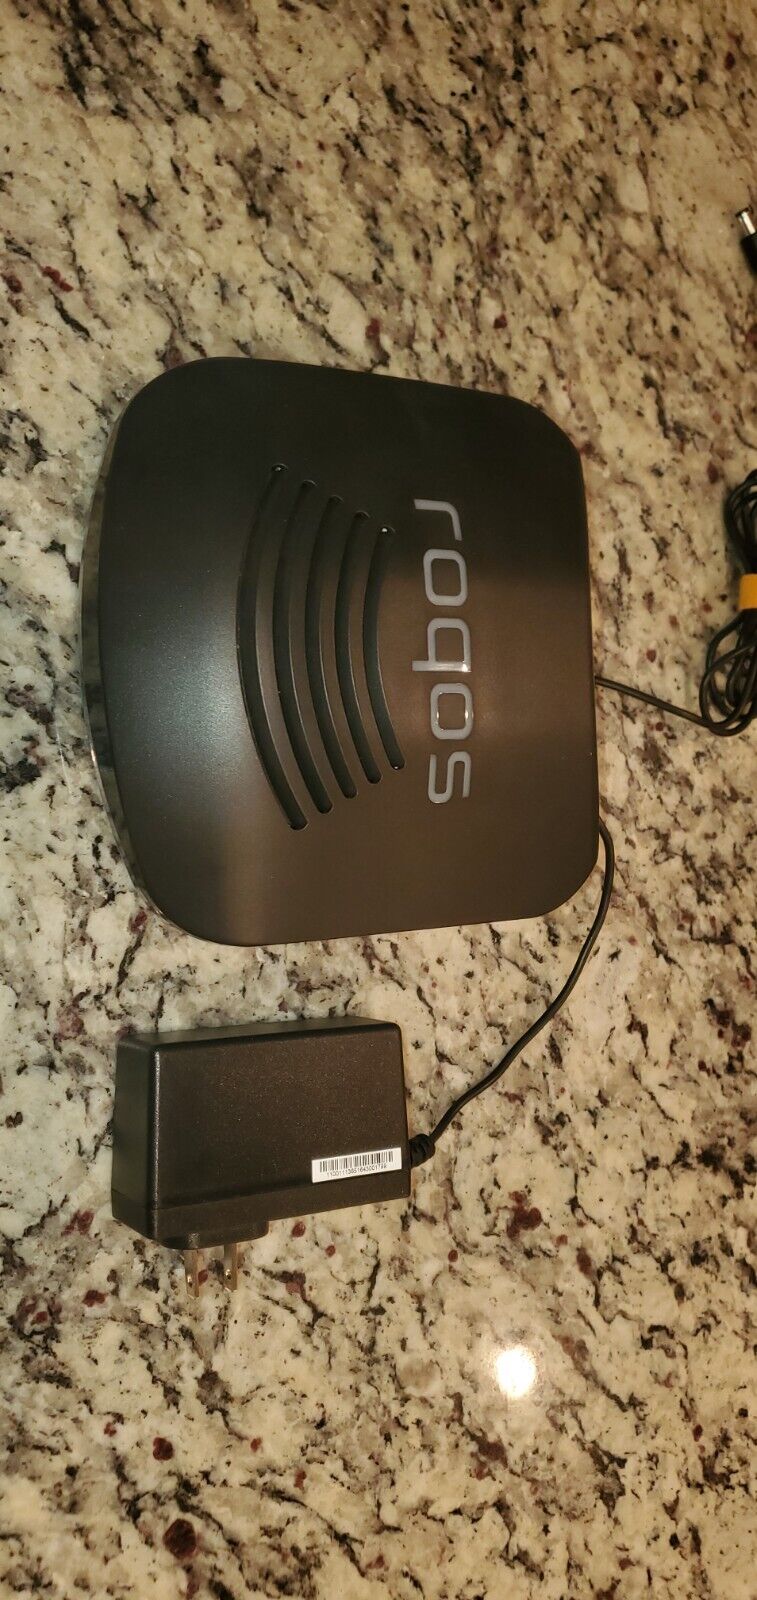 Roqos Core RC10 Wifi Router